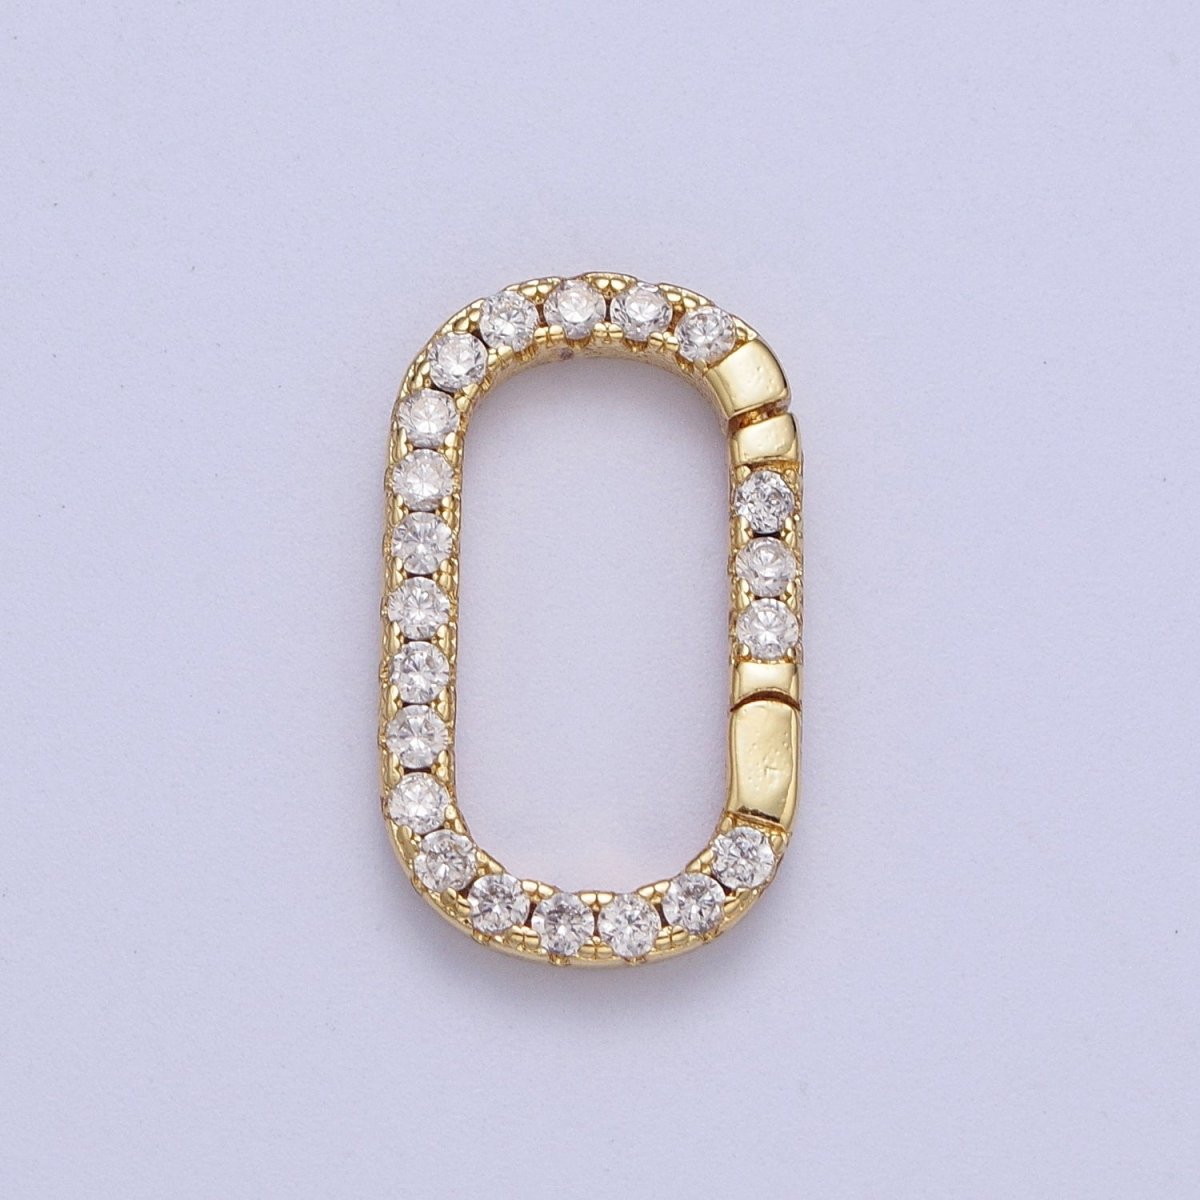 24K Gold Filled Clear Micro Paved CZ Long Oval Spring Gate Ring Supply For Jewelry Making L-935 - DLUXCA